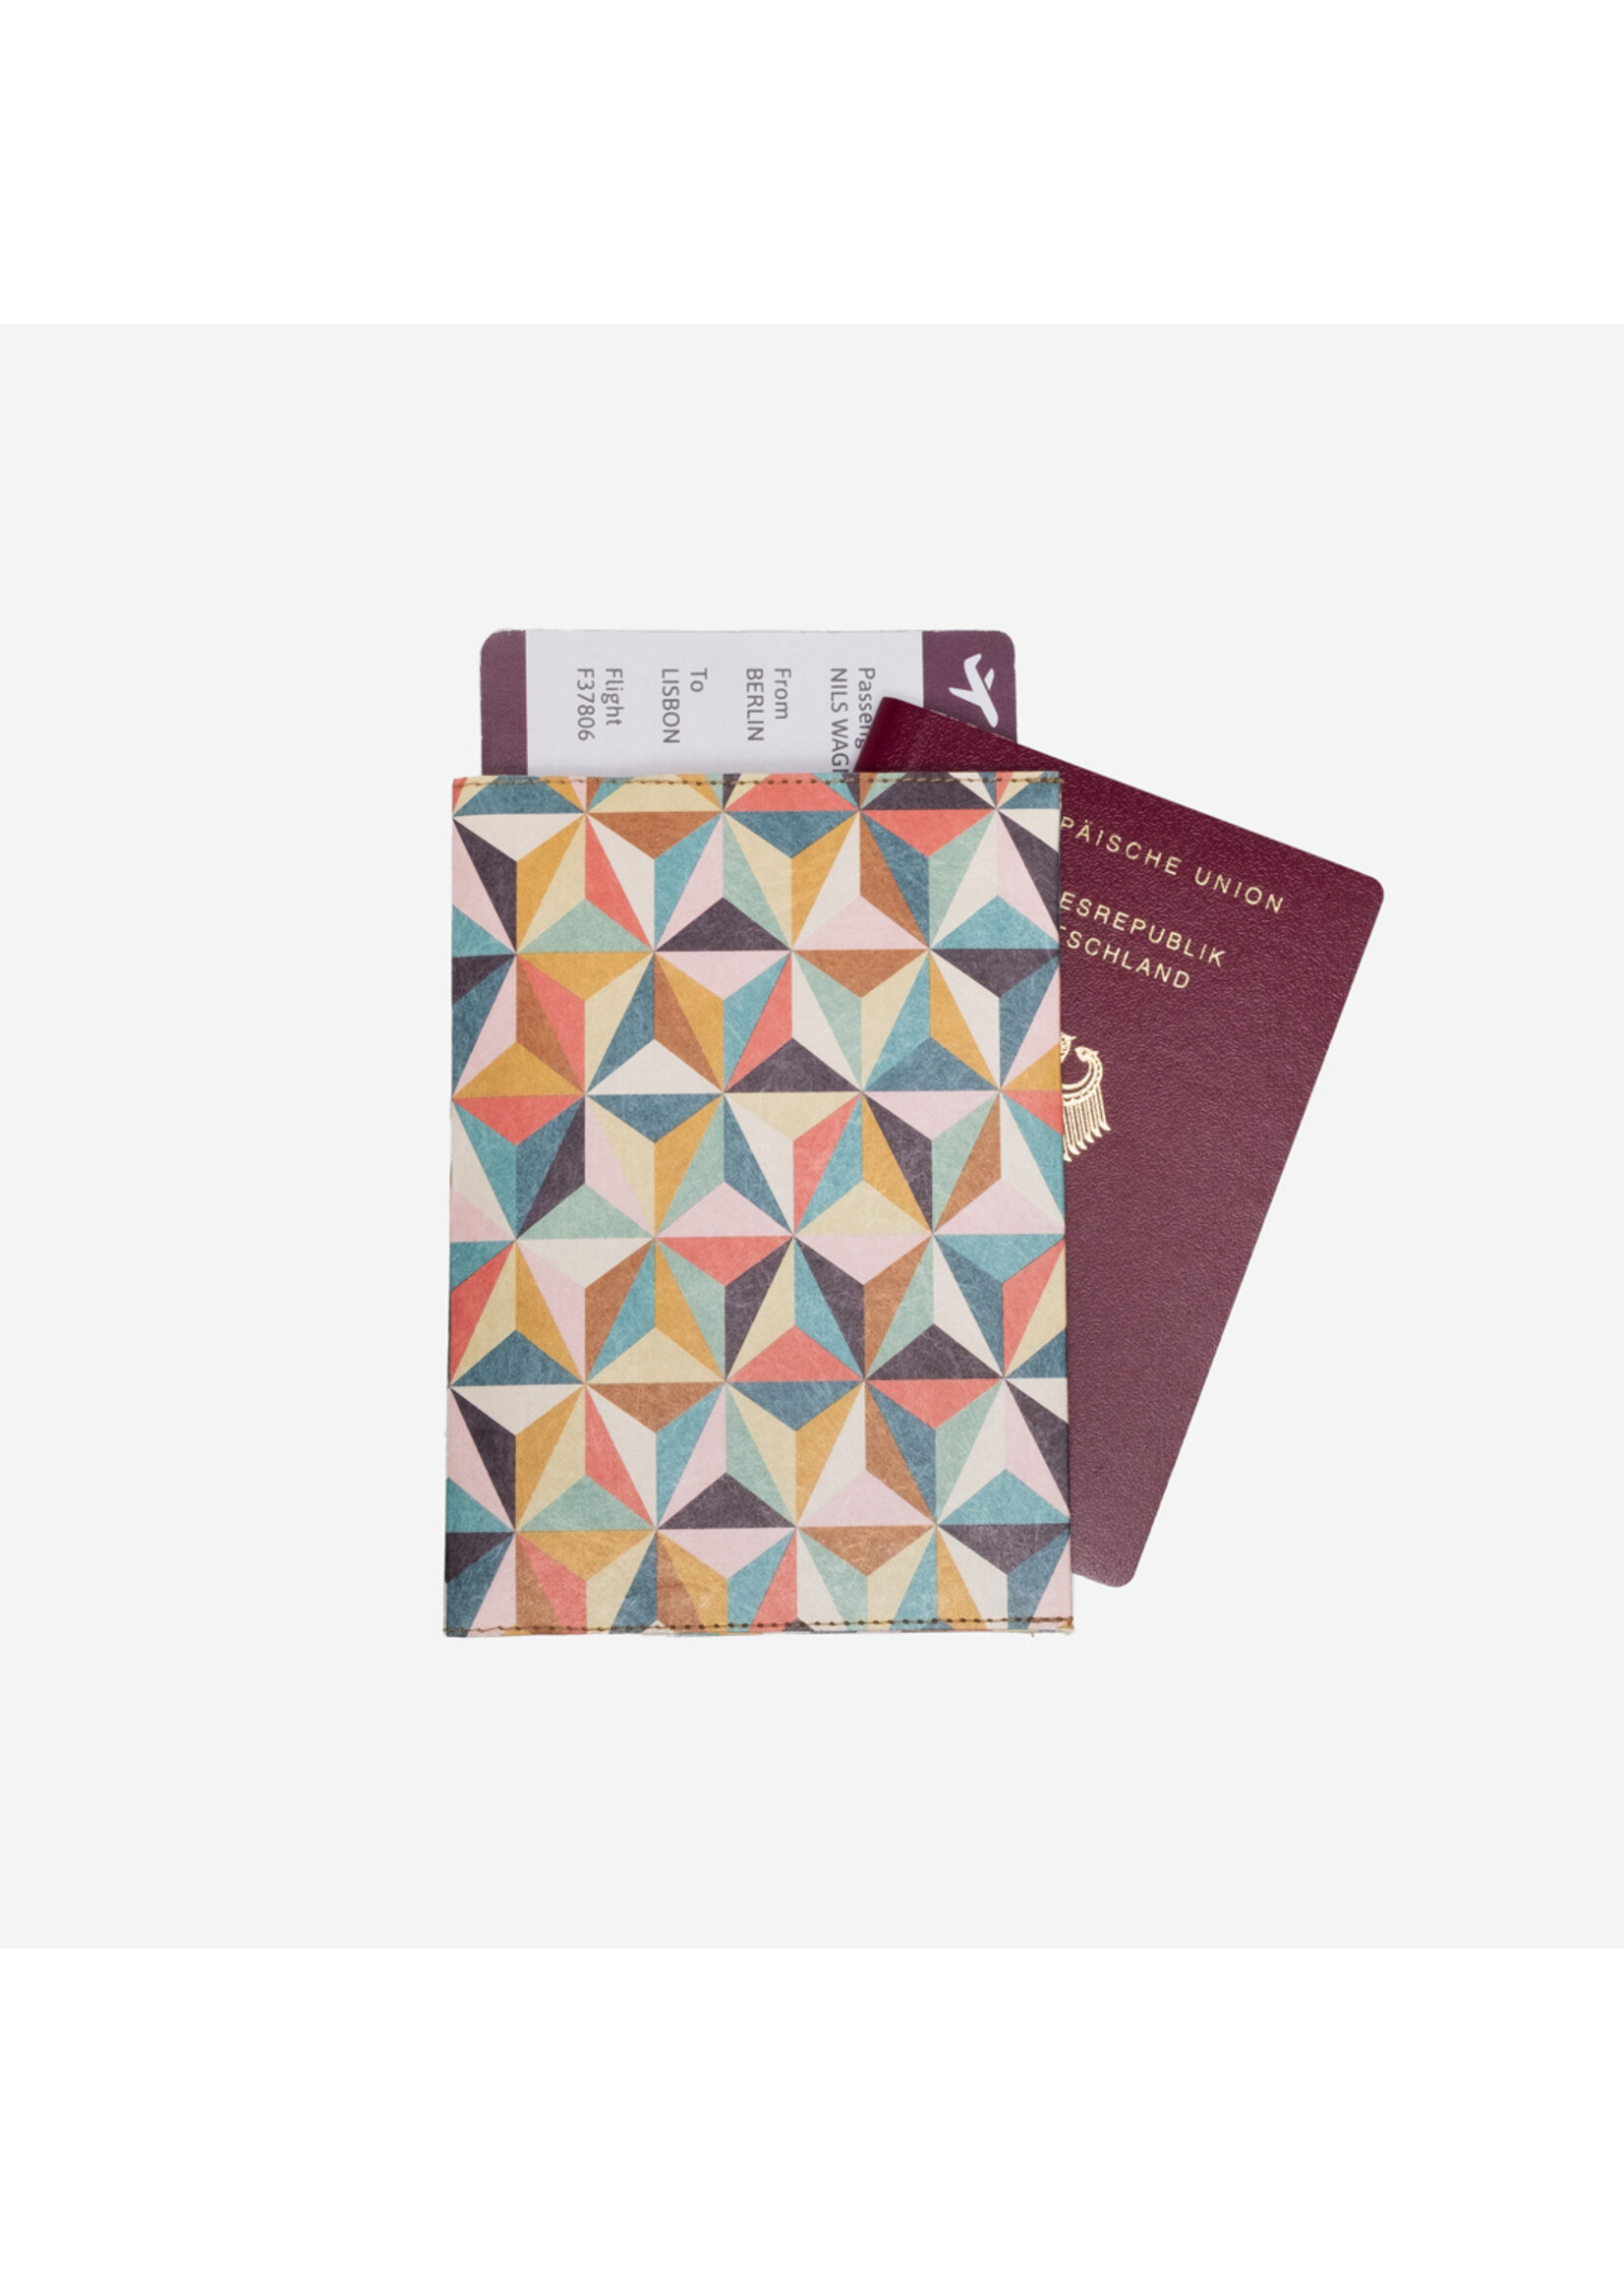 Paprcuts Reisepass Cover - Abstract Retro Tyvek